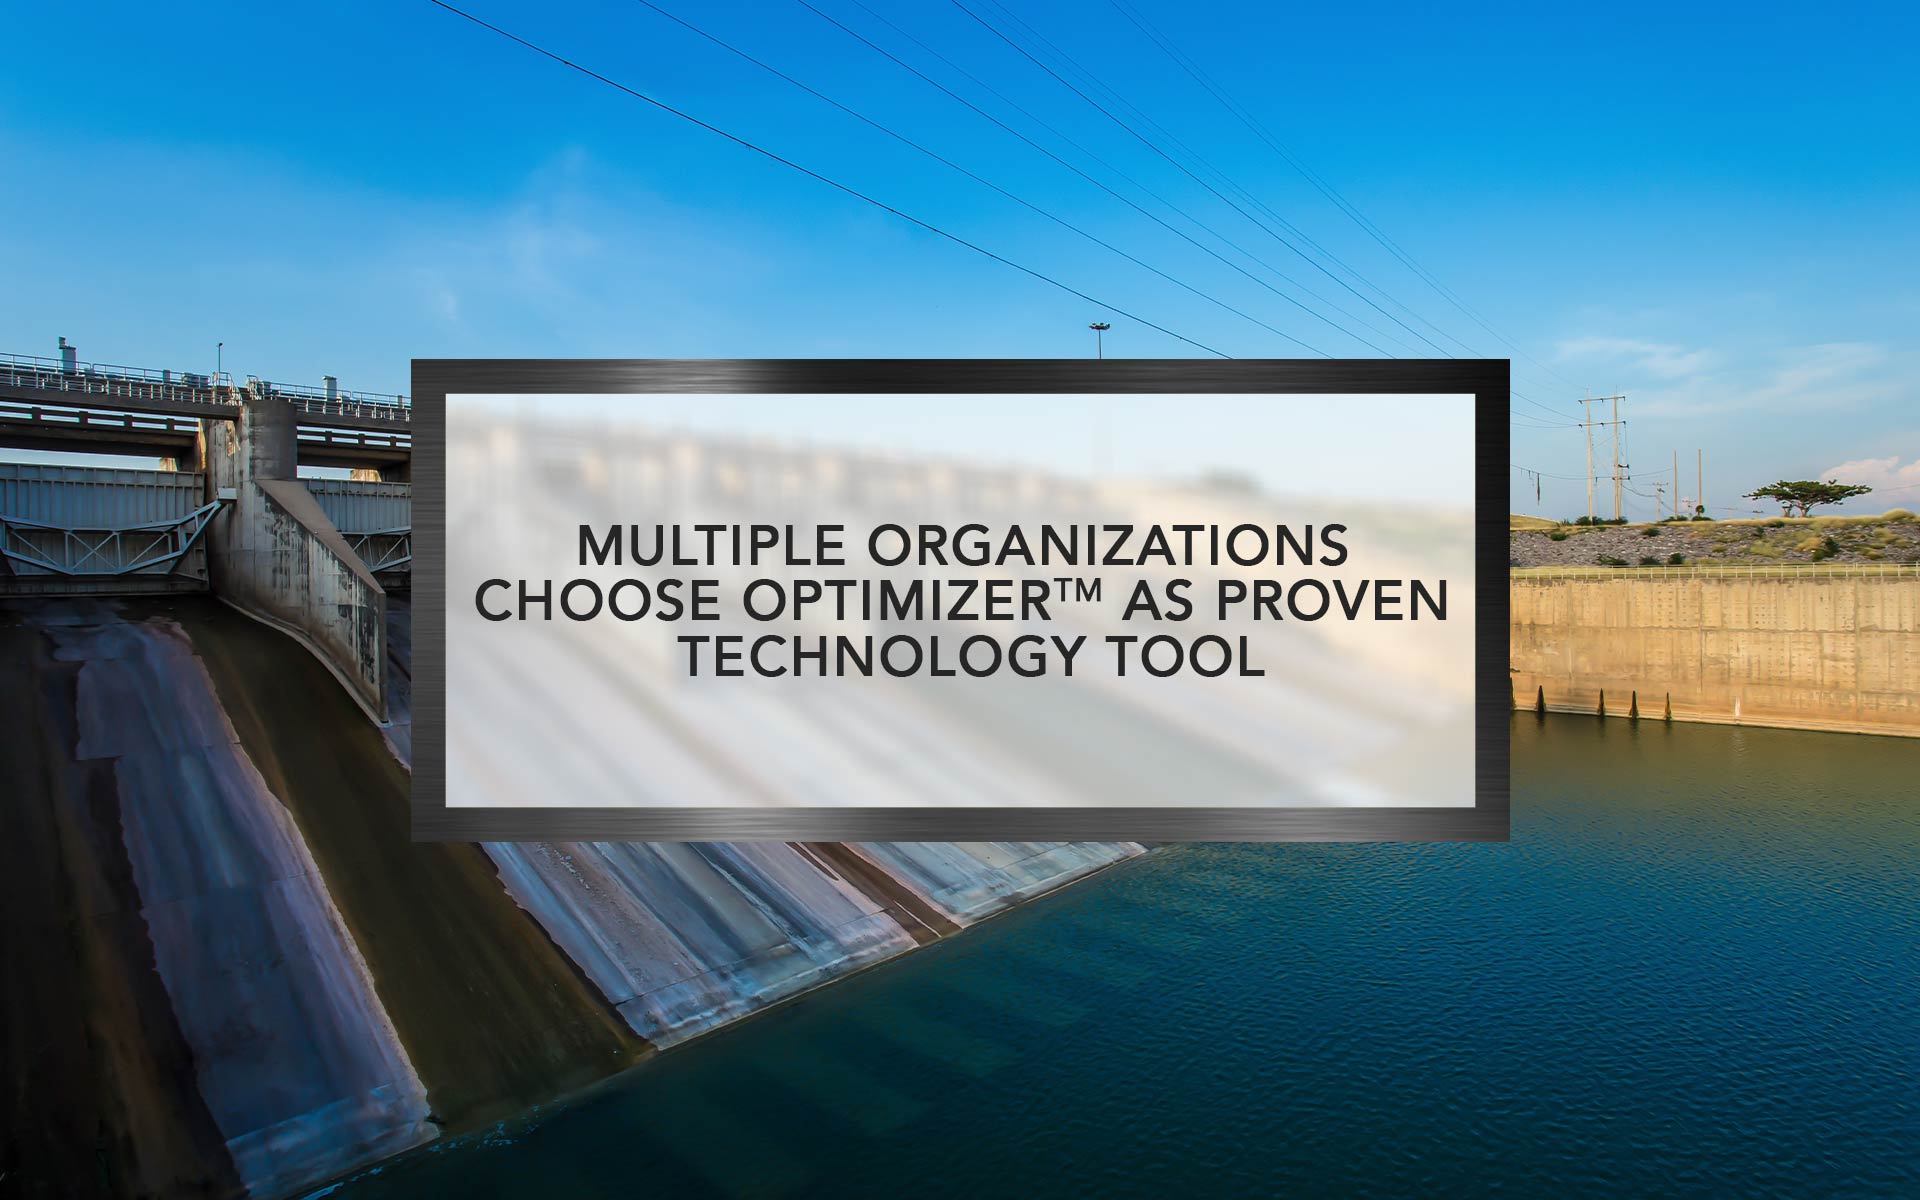 Multiple Organizations Choose Optimizer as Proven Technology Tool